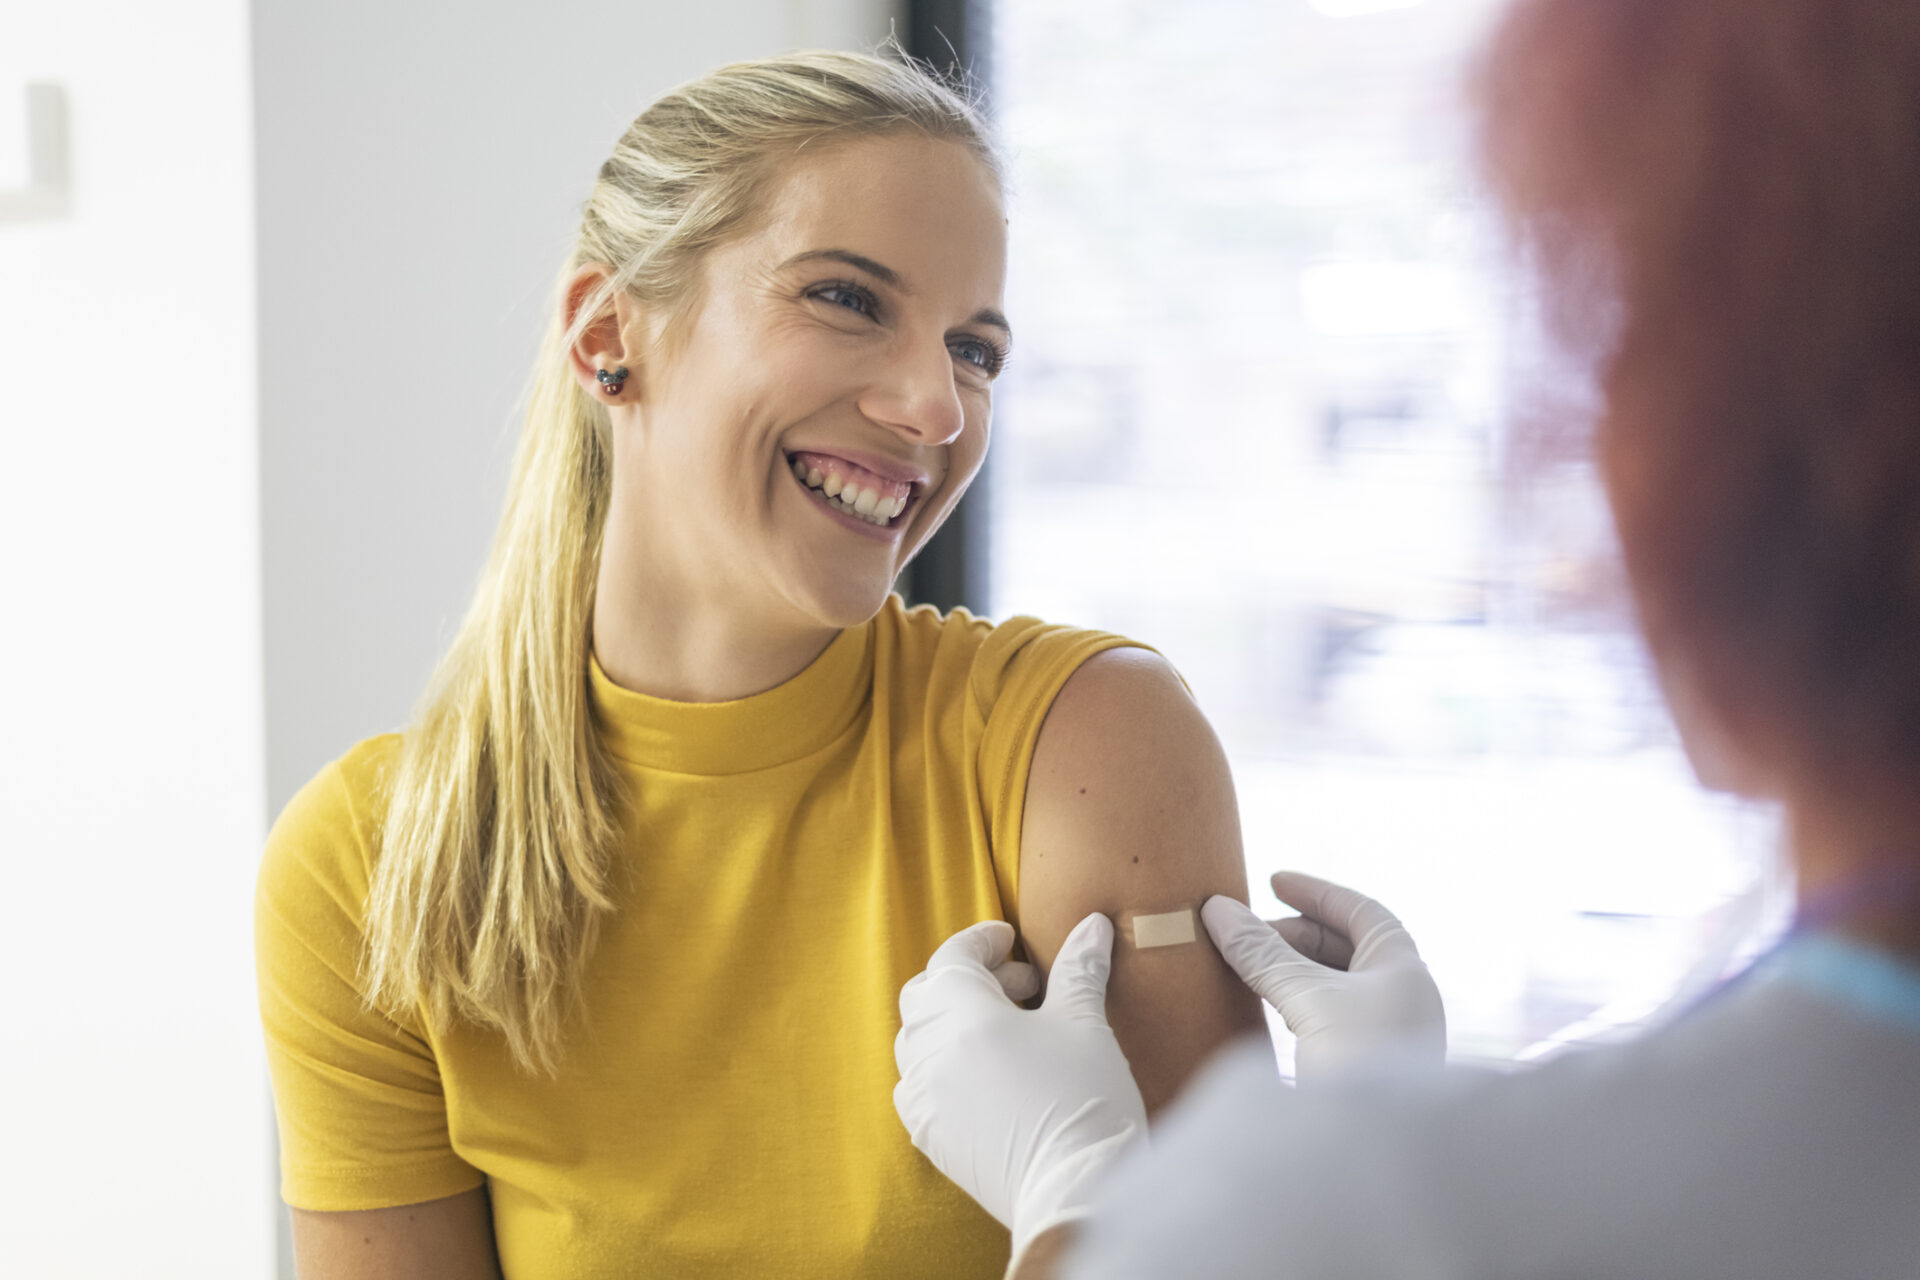 A healthcare worker applies a bandage to a smiling patients arm. The patient has just received the flu vaccine and she appears relieved.